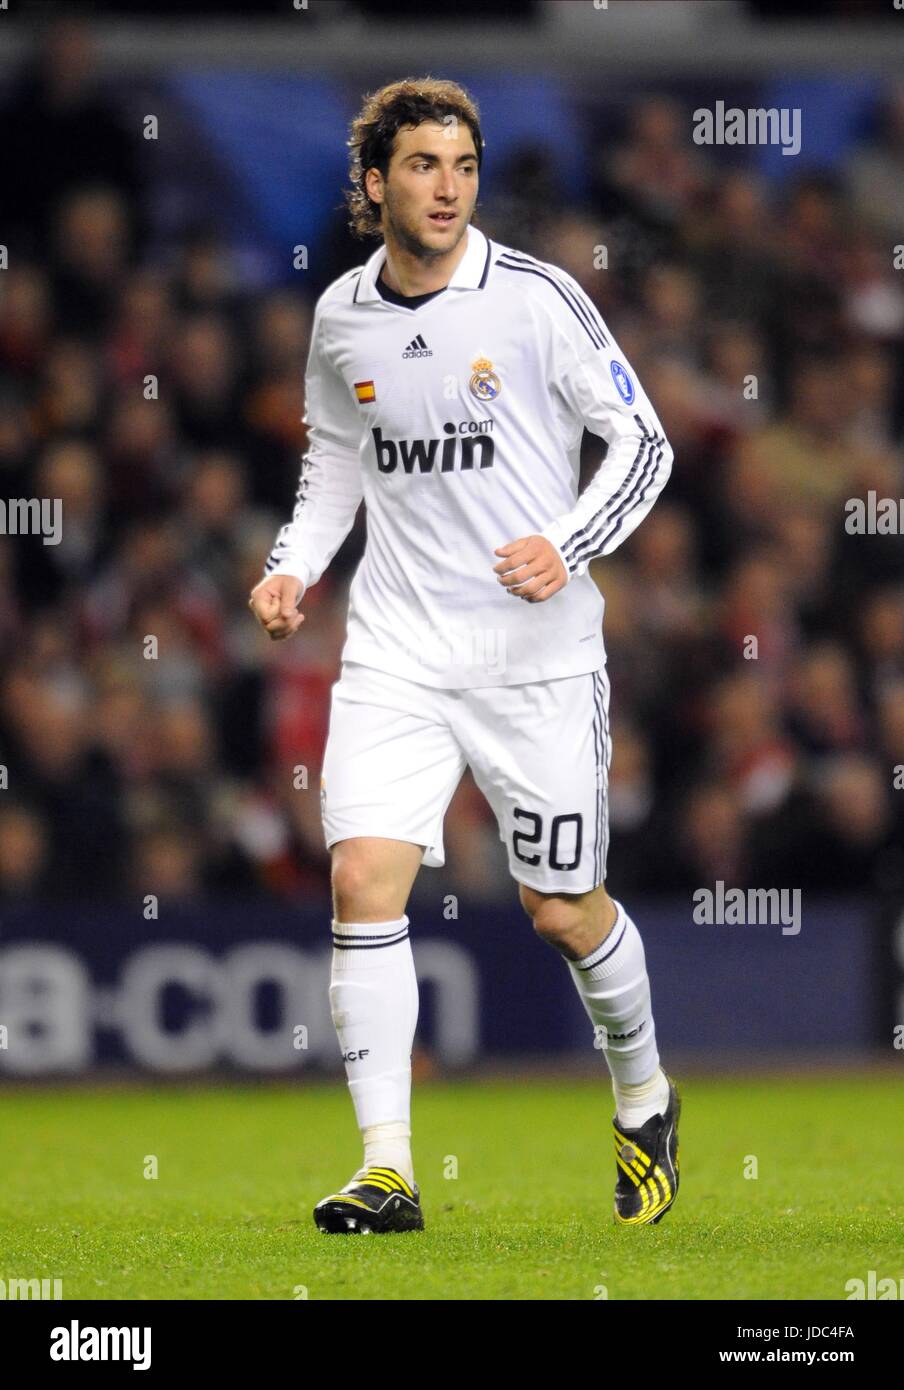 GONZALO HIGUAIN REAL MADRID ANFIELD LIVERPOOL ENGLAND 10 March 2009 Stock Photo